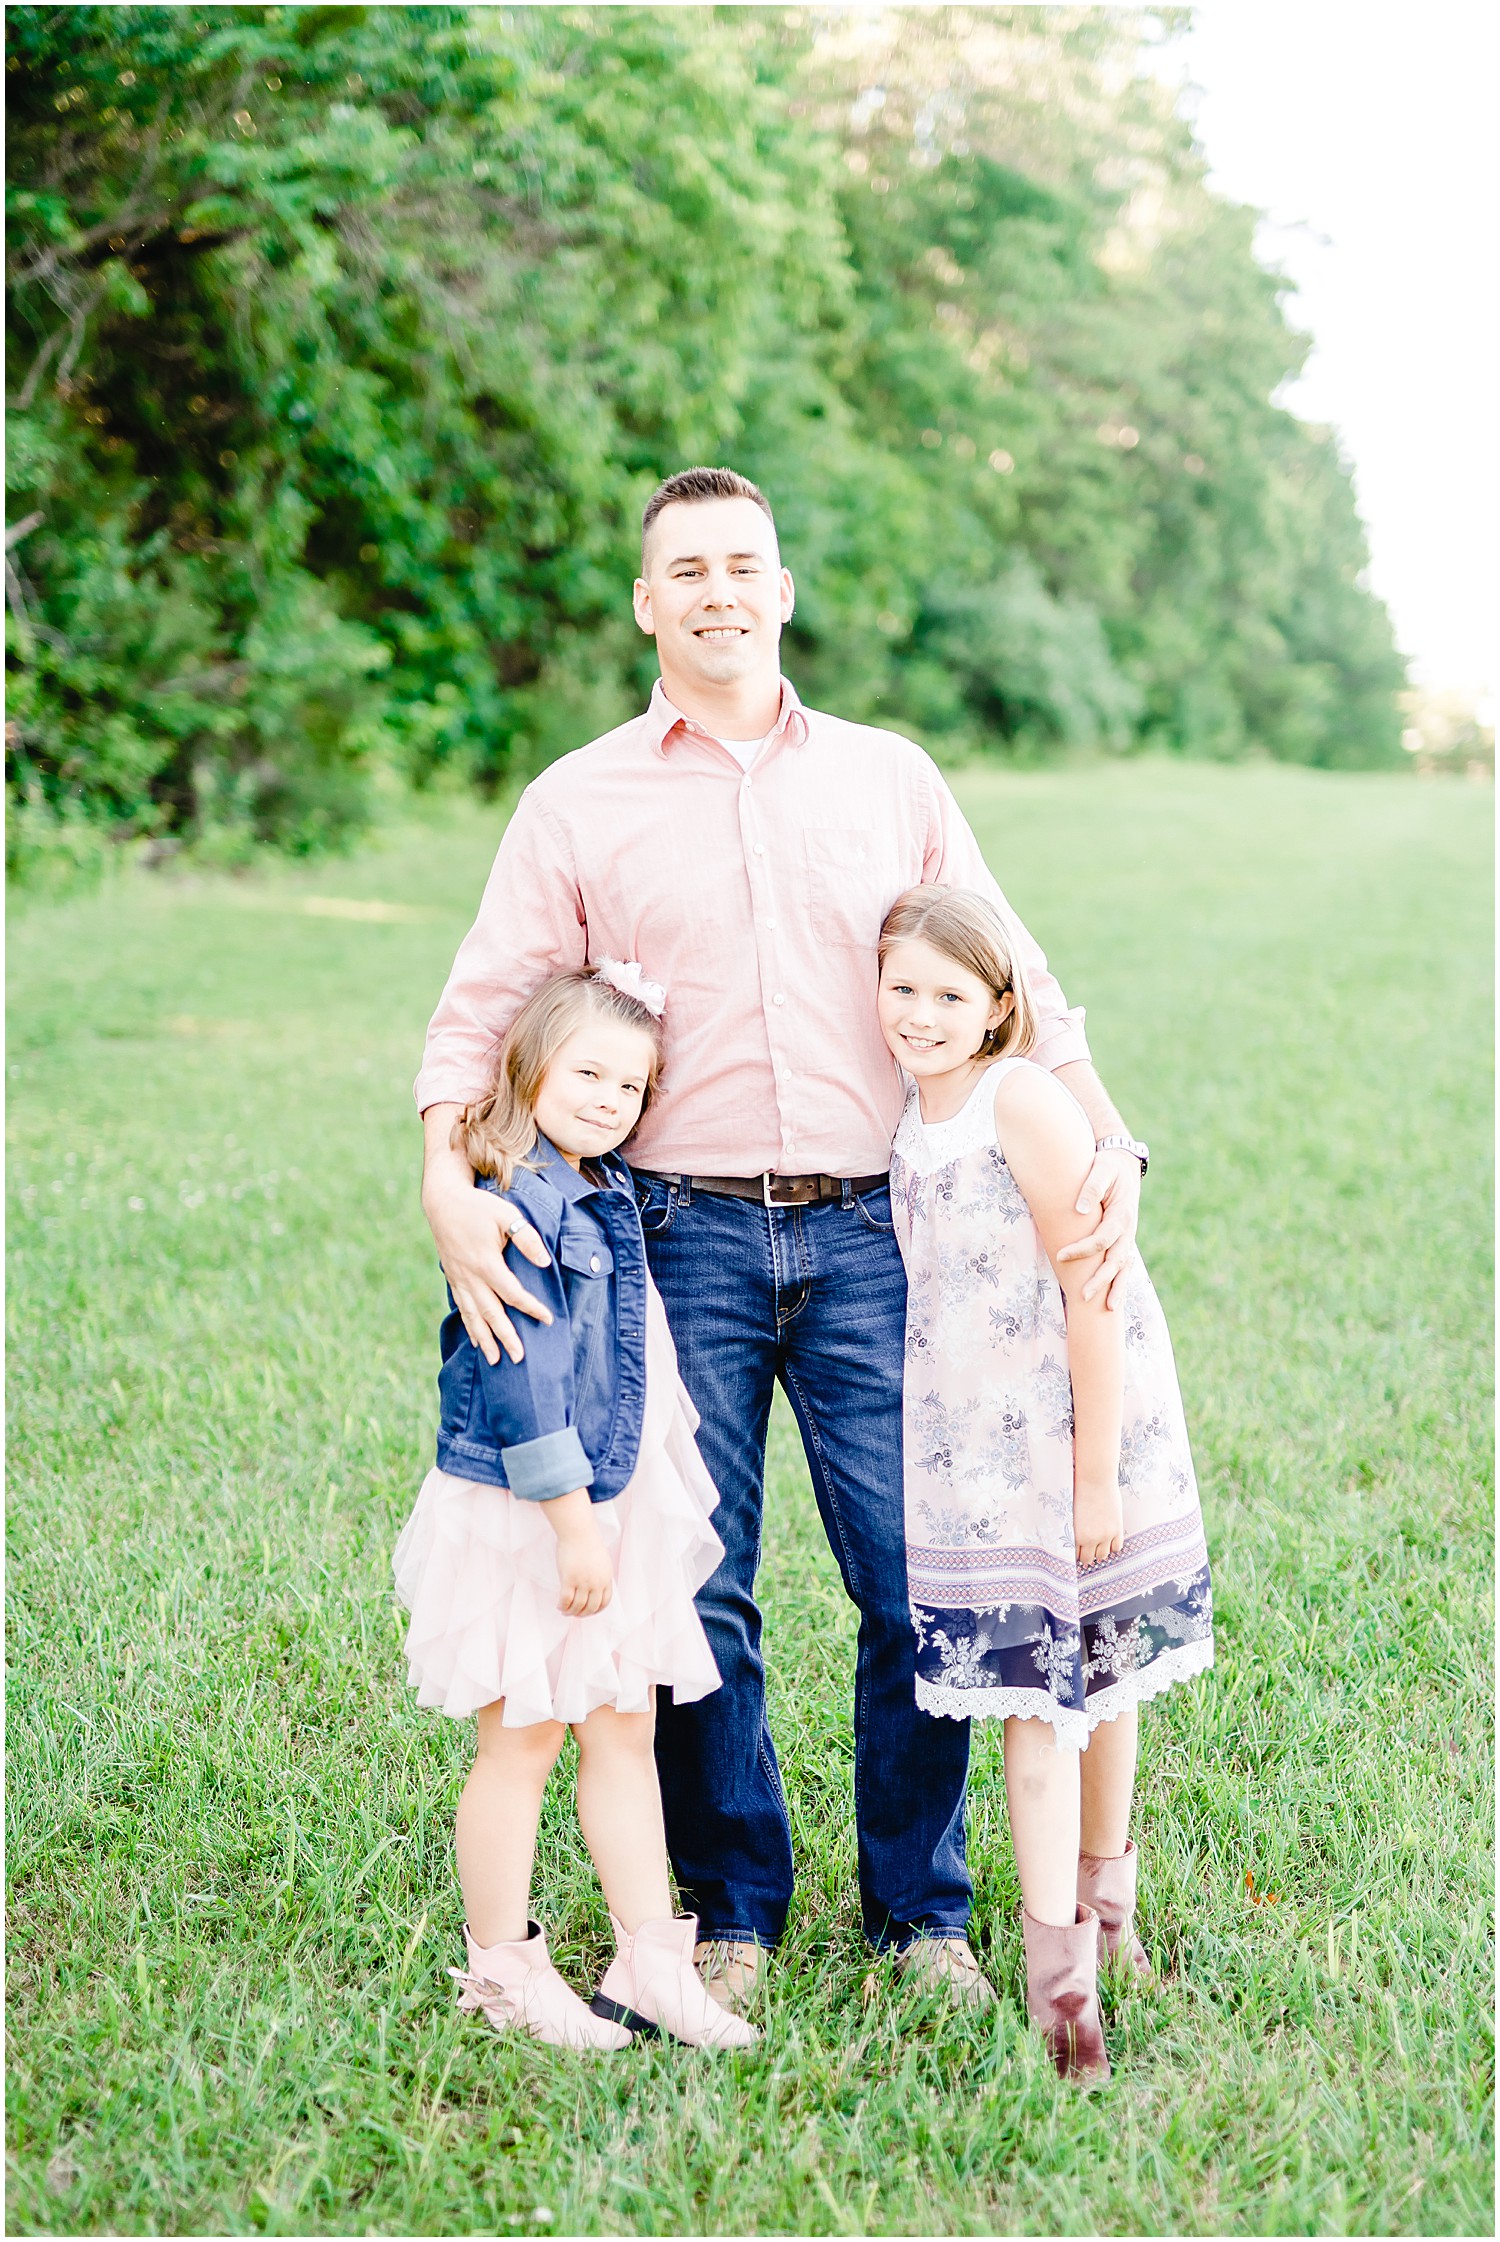 dad posing with daughters in grass